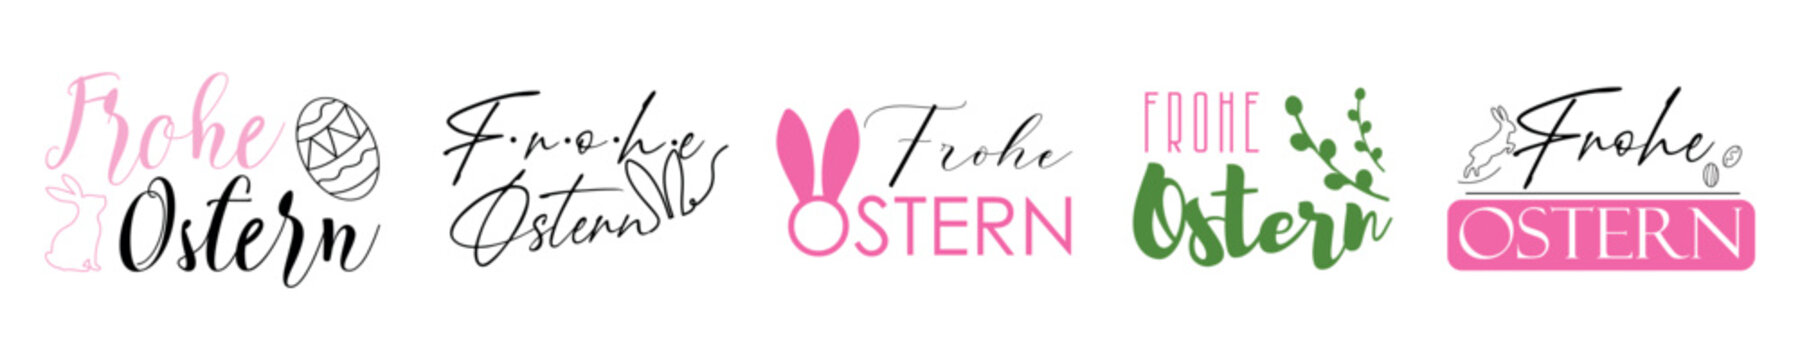 Set of banners with text FROHE OSTERN (Happy Easter in German) on white background